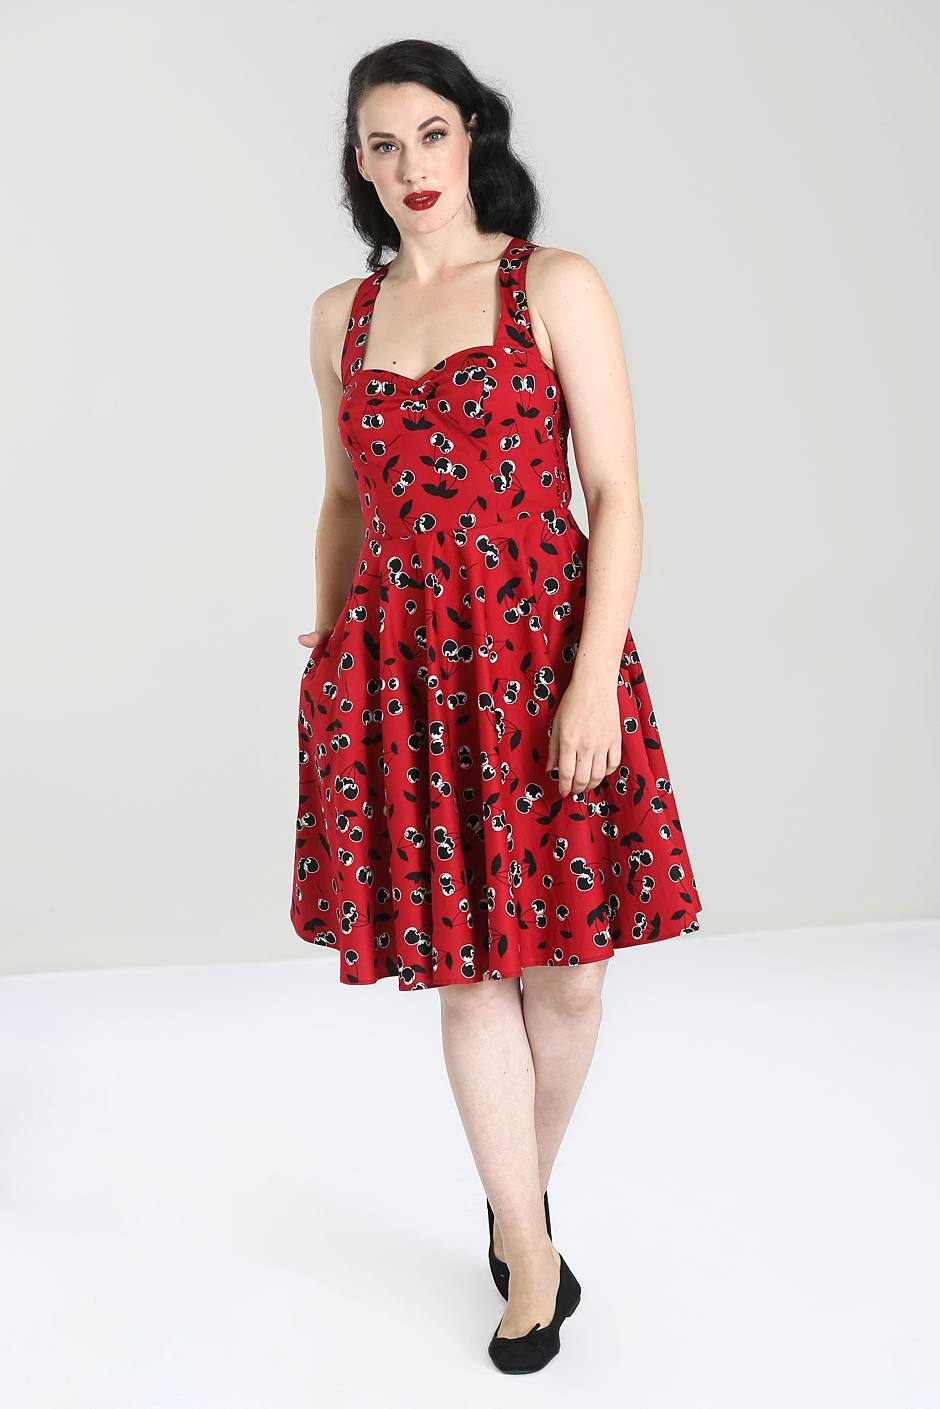 Pinup style dark haired woman with red lipstick wearing a red strappy knee length fit and flare dress with an all over black cherry print.